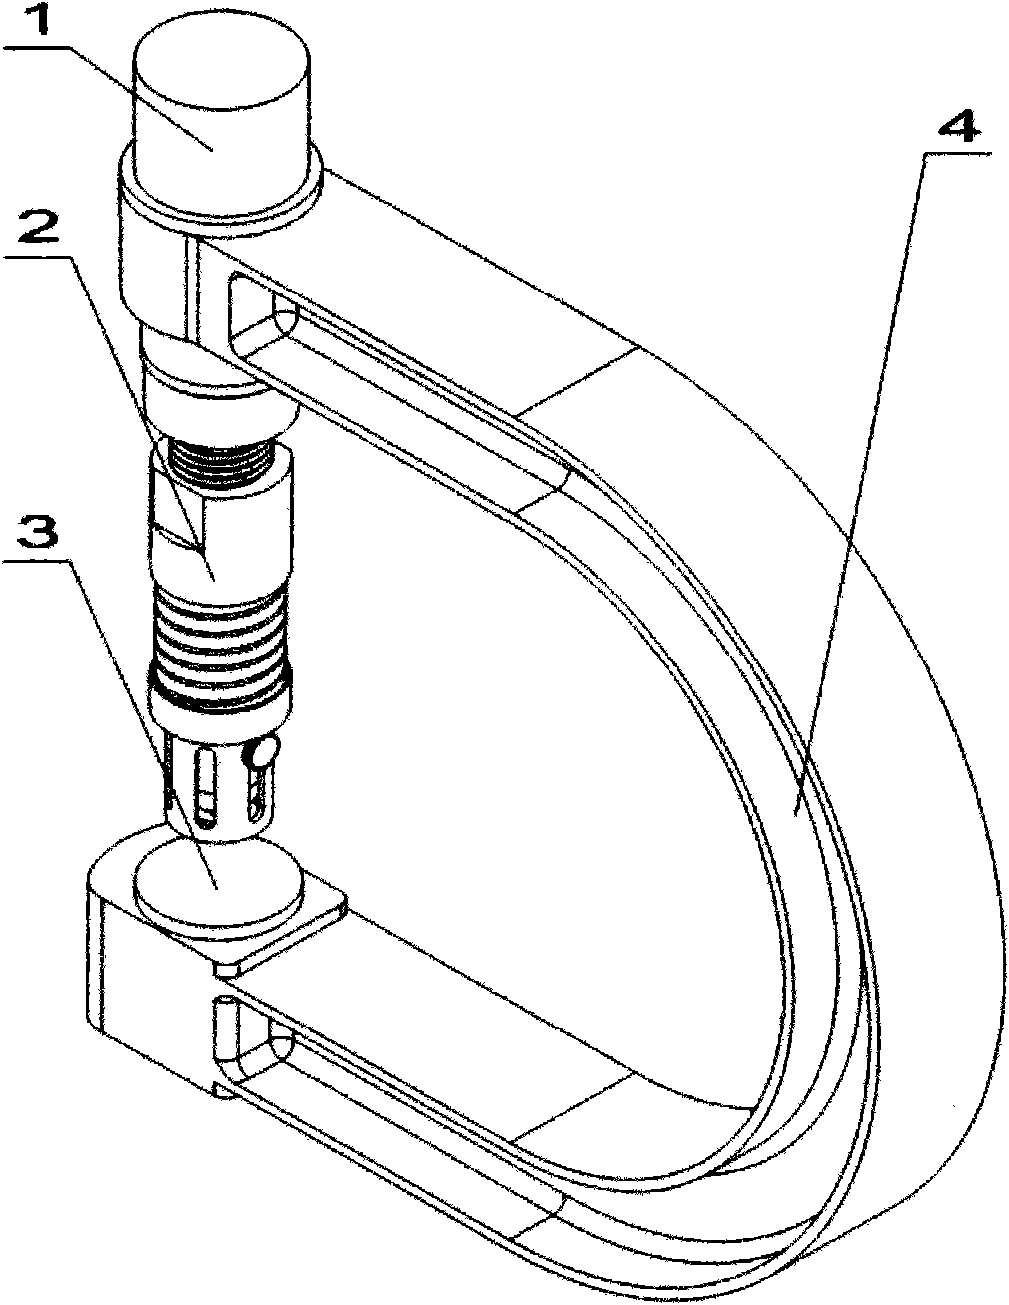 Mold-free and rivet-free connection device